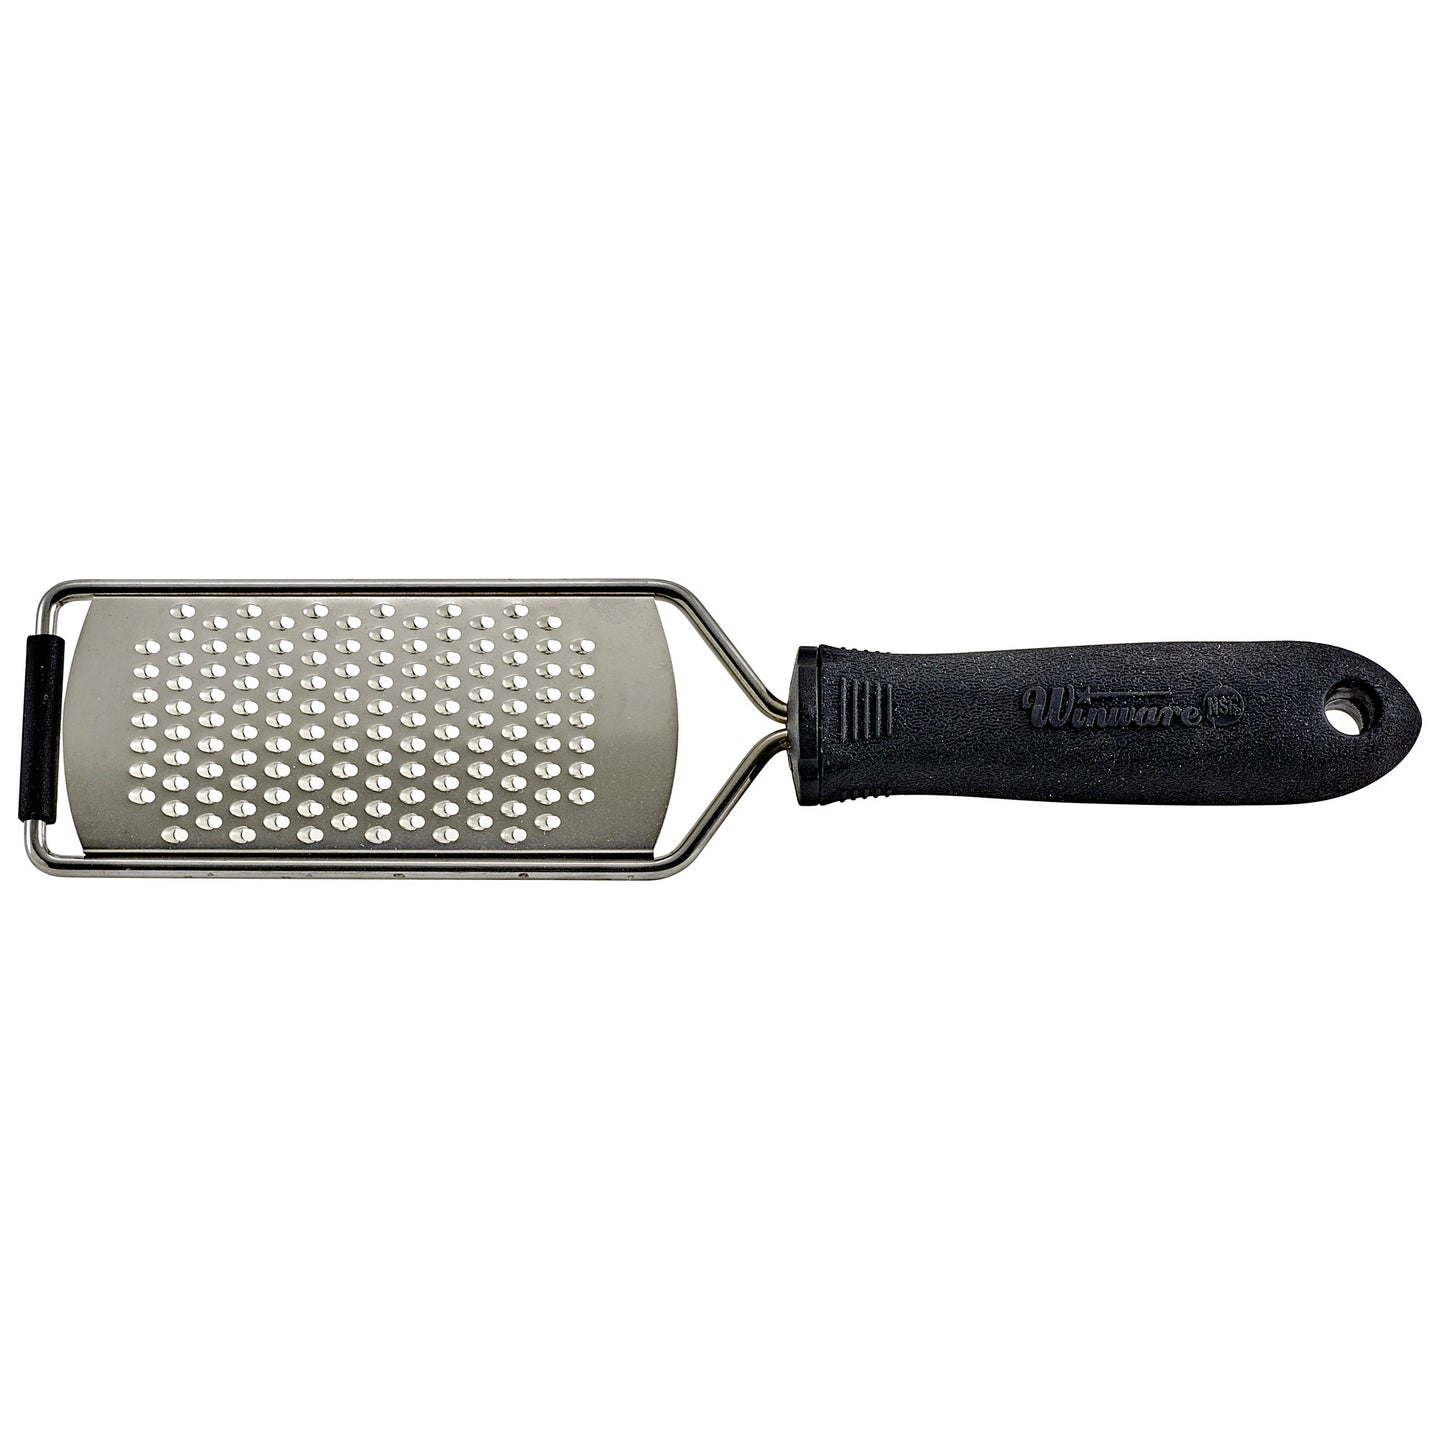 VP-311 - Grater with 1.5mm Dia. Holes with Soft Grip Handle